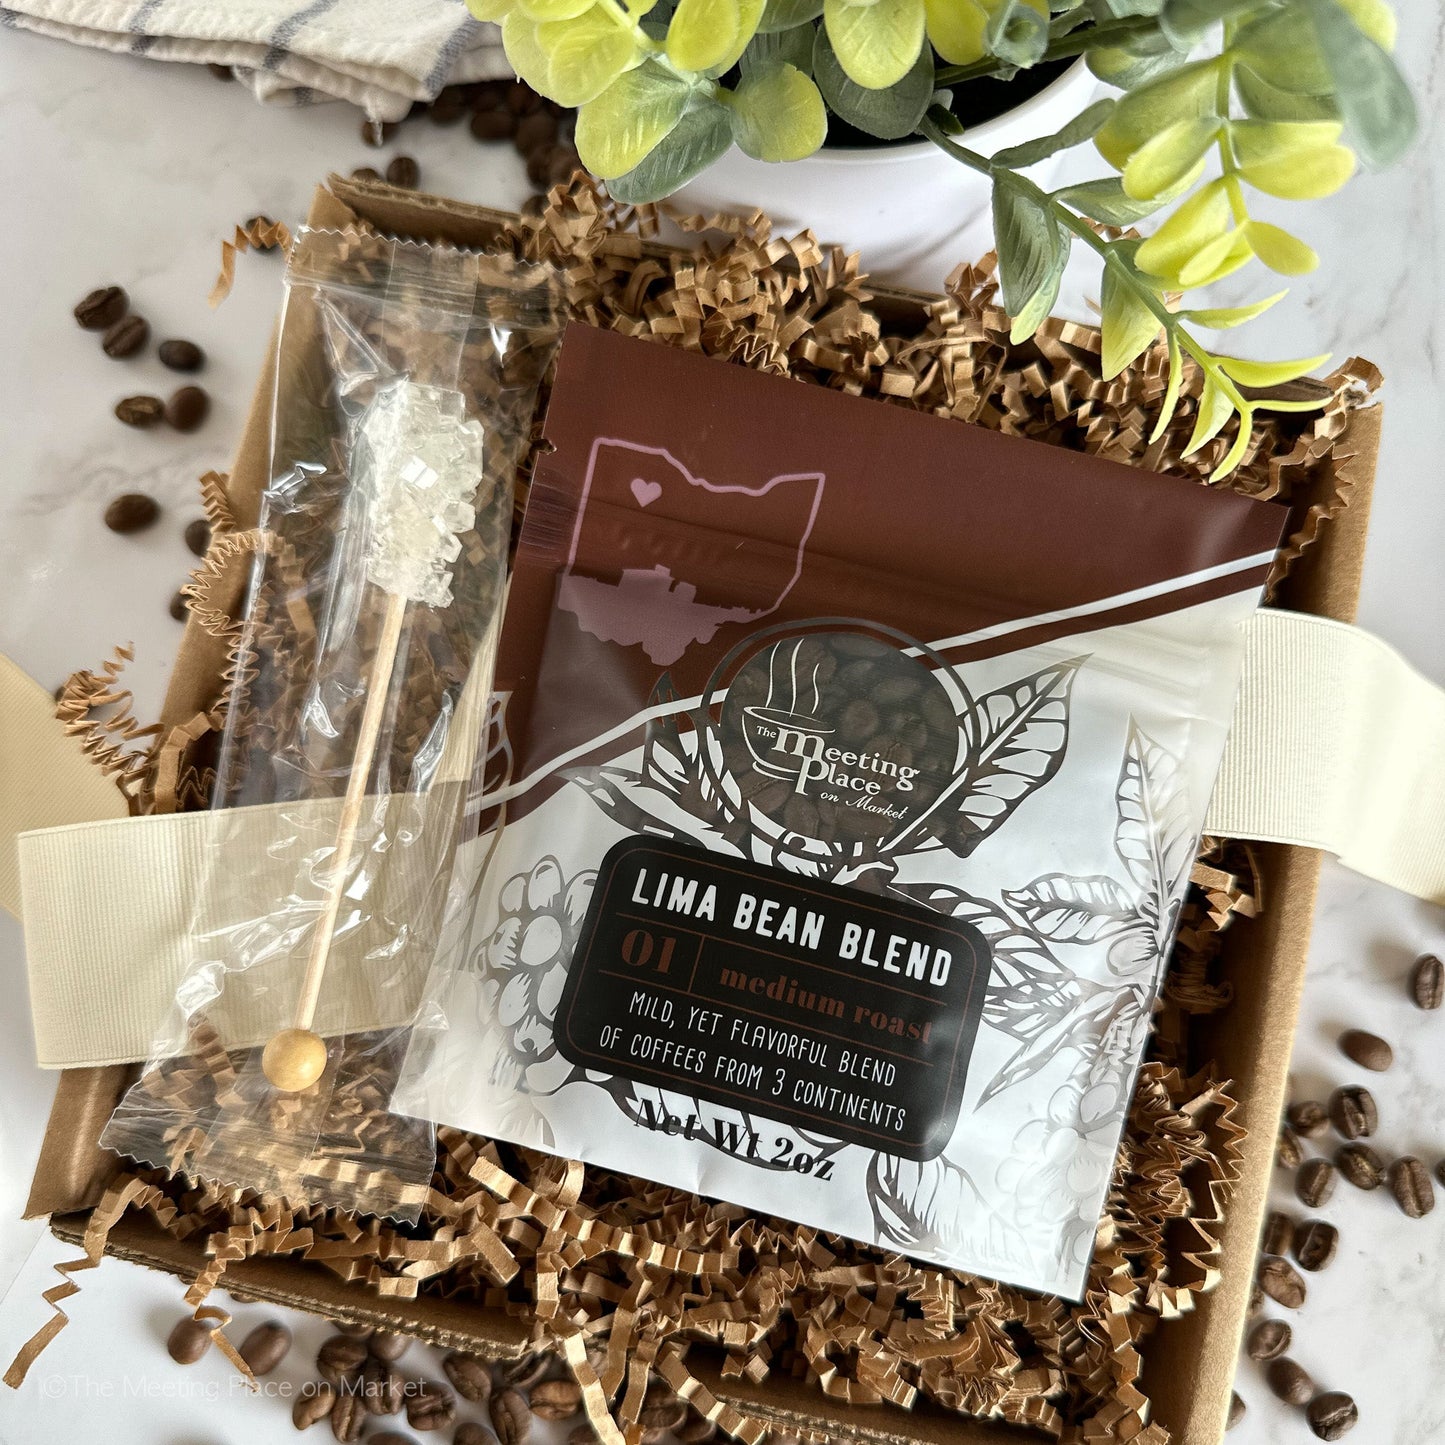 Thinking of You Gift Coffee Gift - Say It With Coffee CoffeeMail Gift Box - The Meeting Place on Market